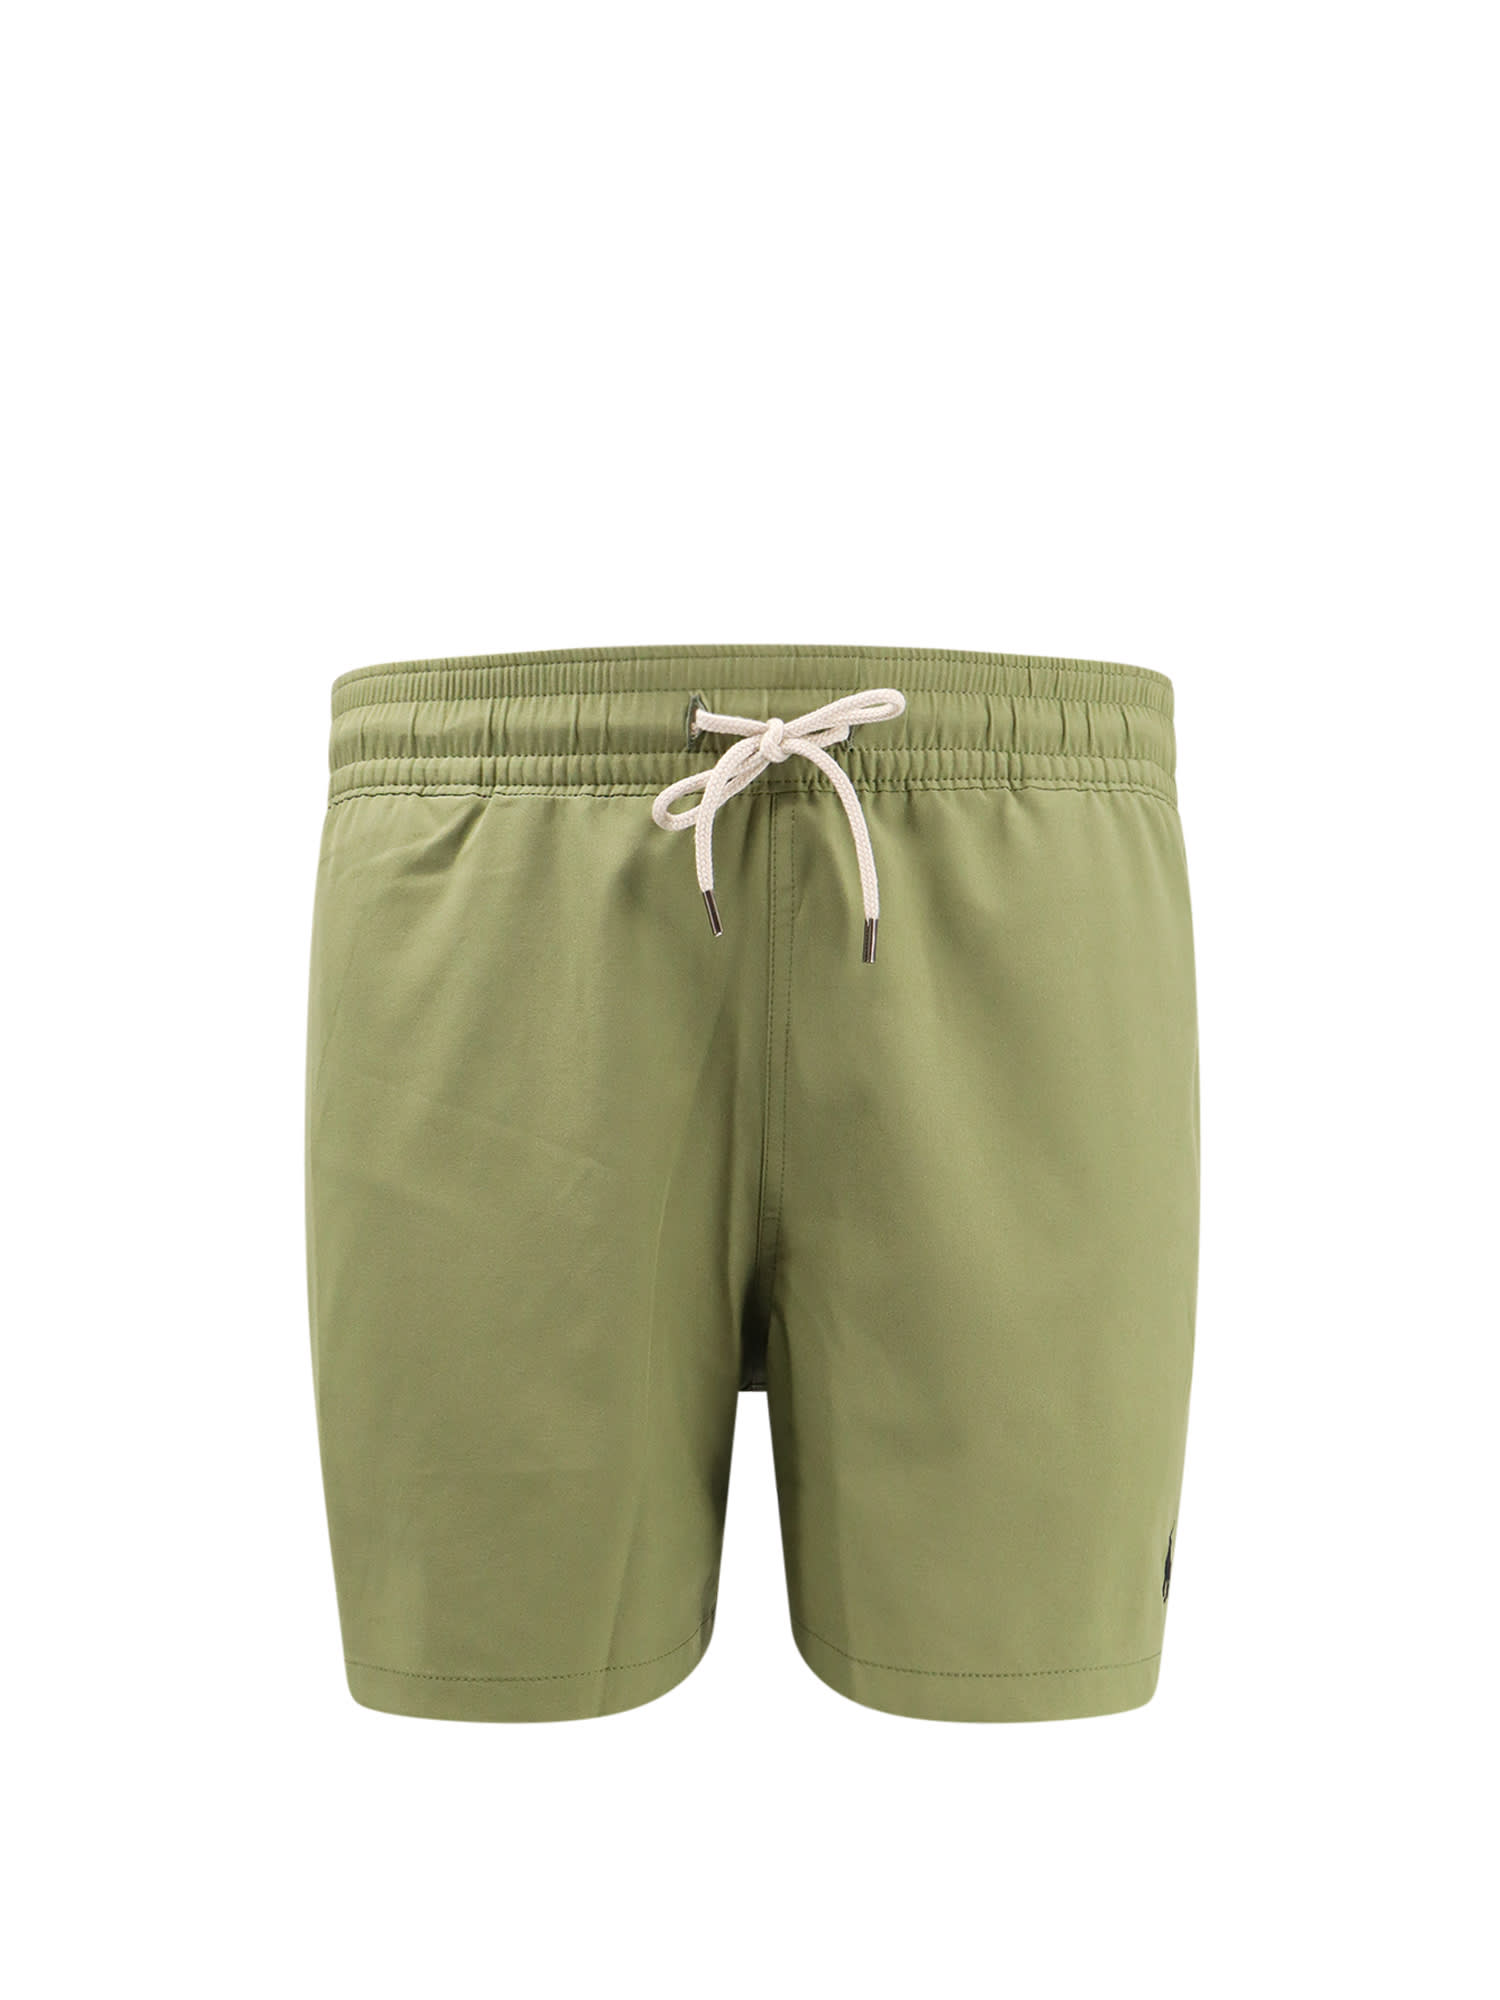 Olive Green Swim Shorts With Embroidered Pony